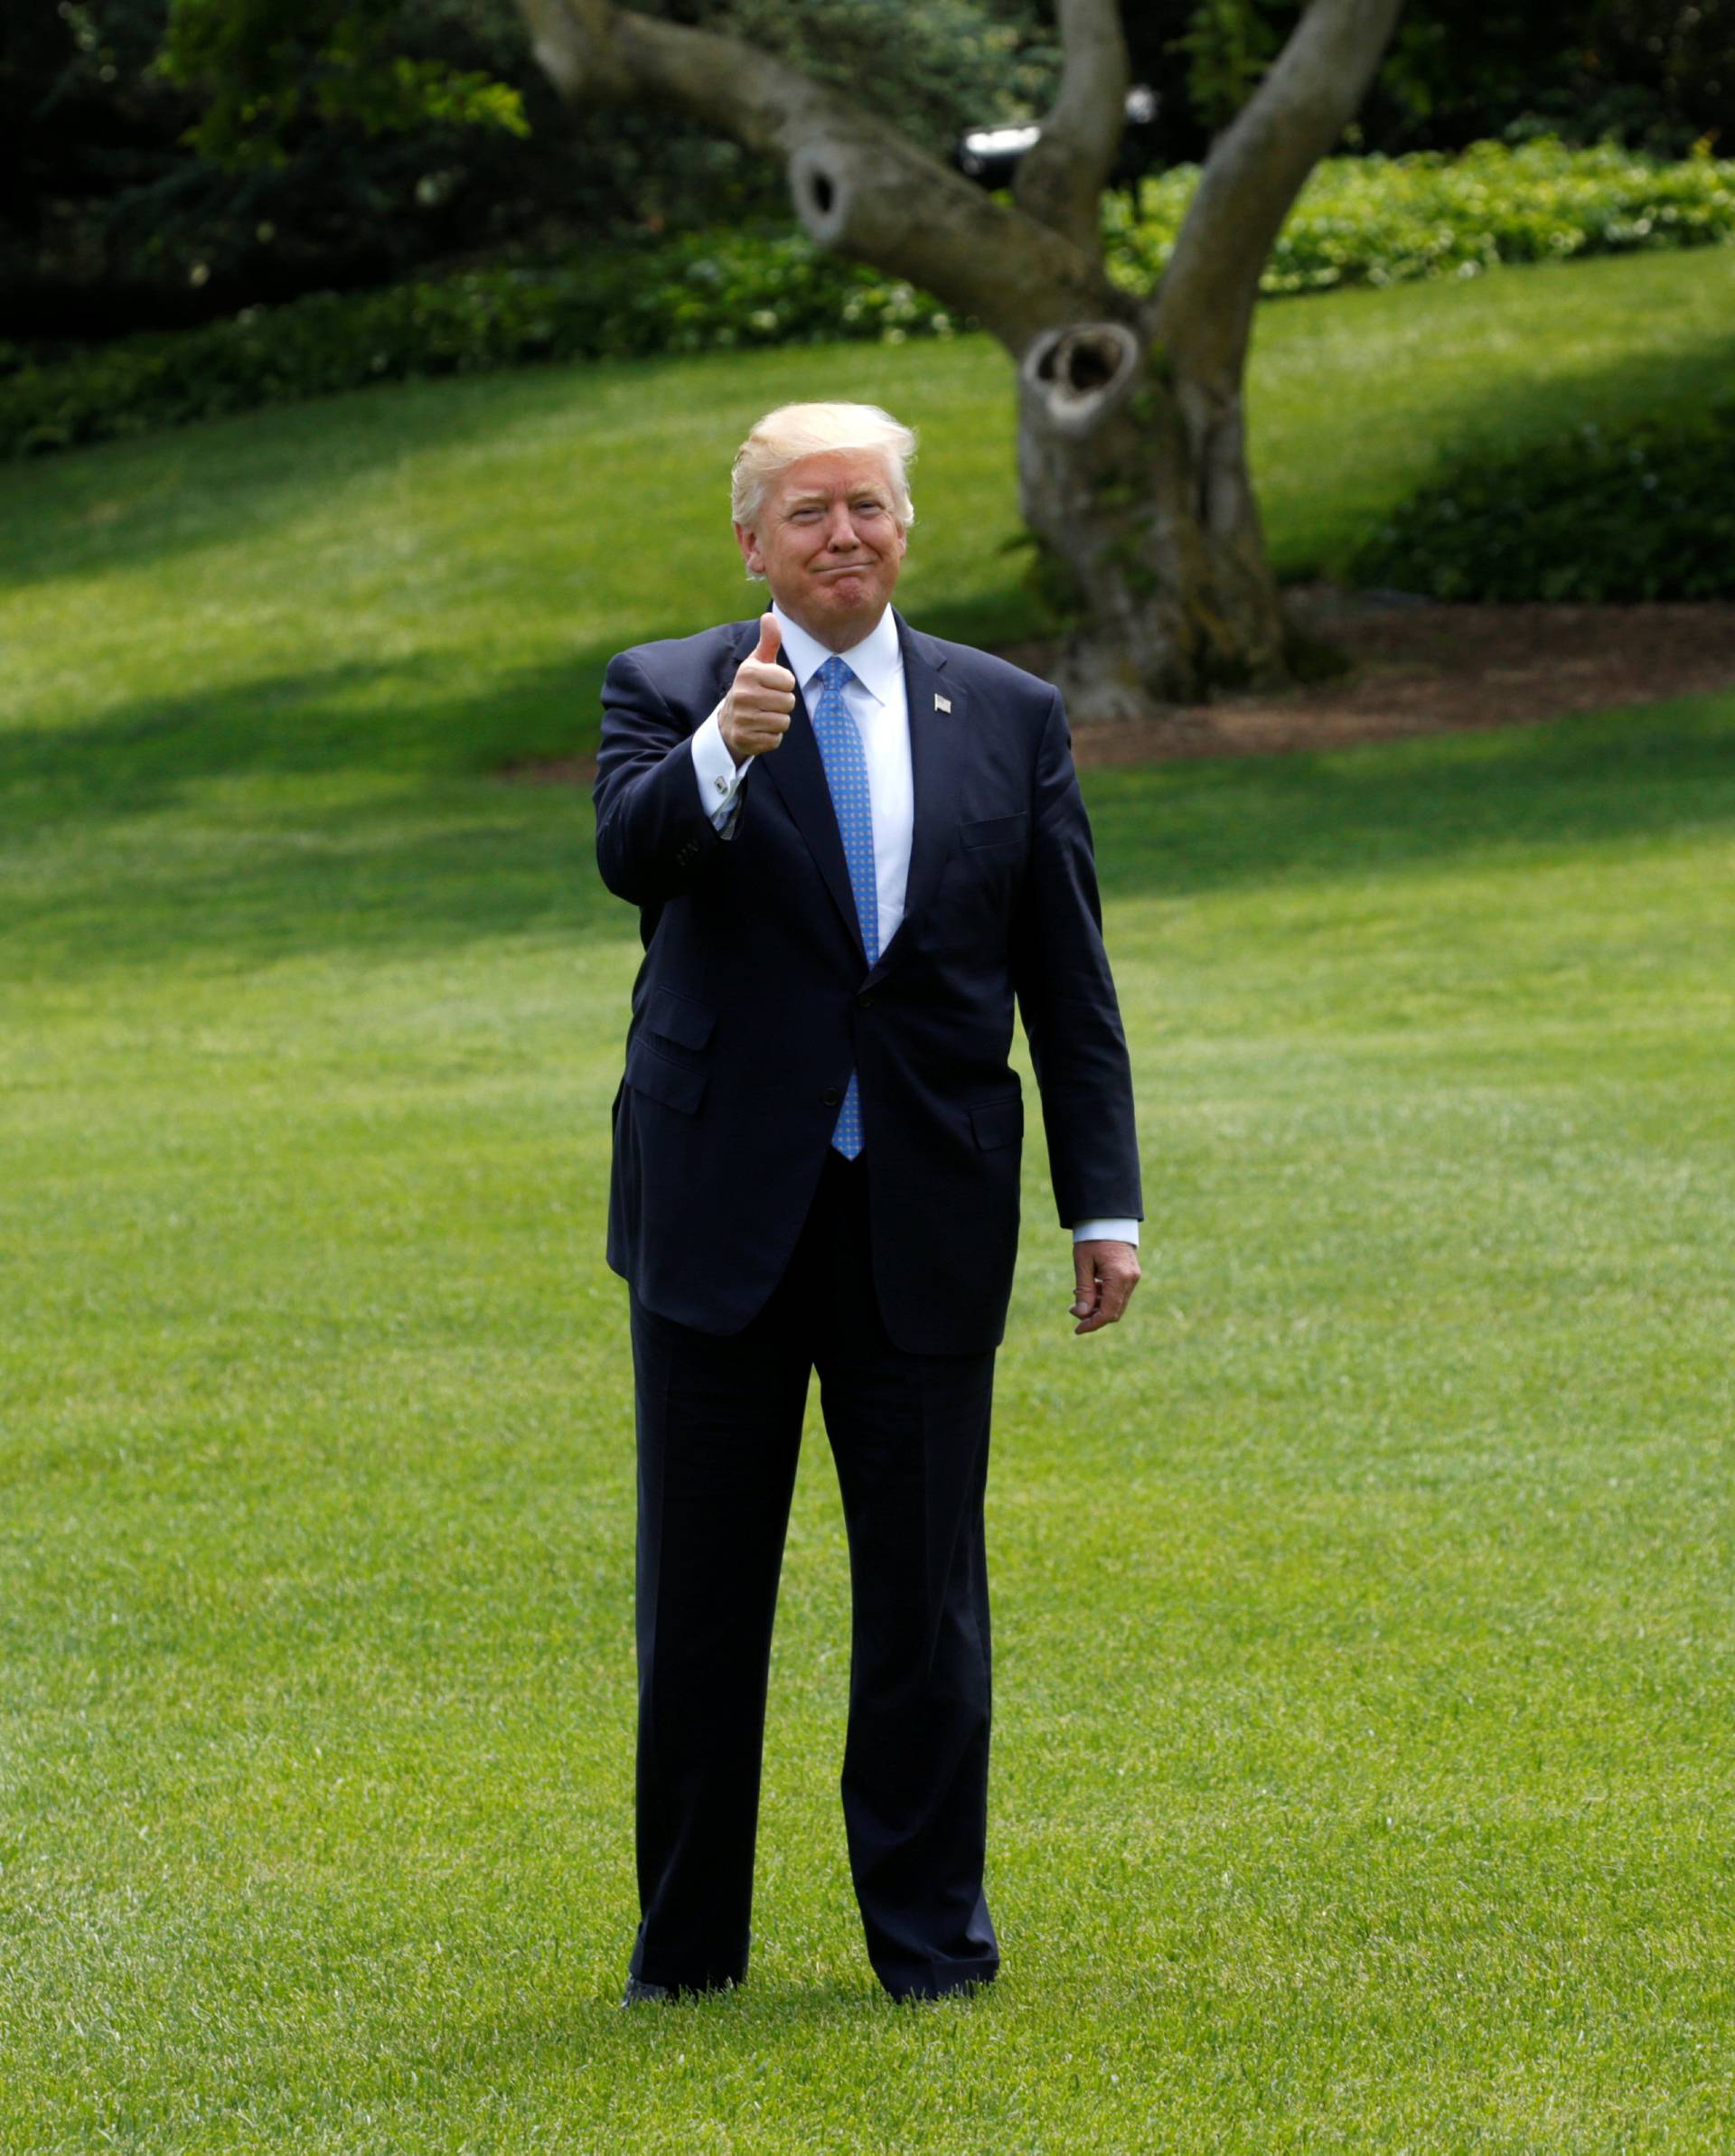 U.S. President Trump stops to give a thumbs up as he departs the White House to embark on a trip to the Middle East and Europe, in Washington